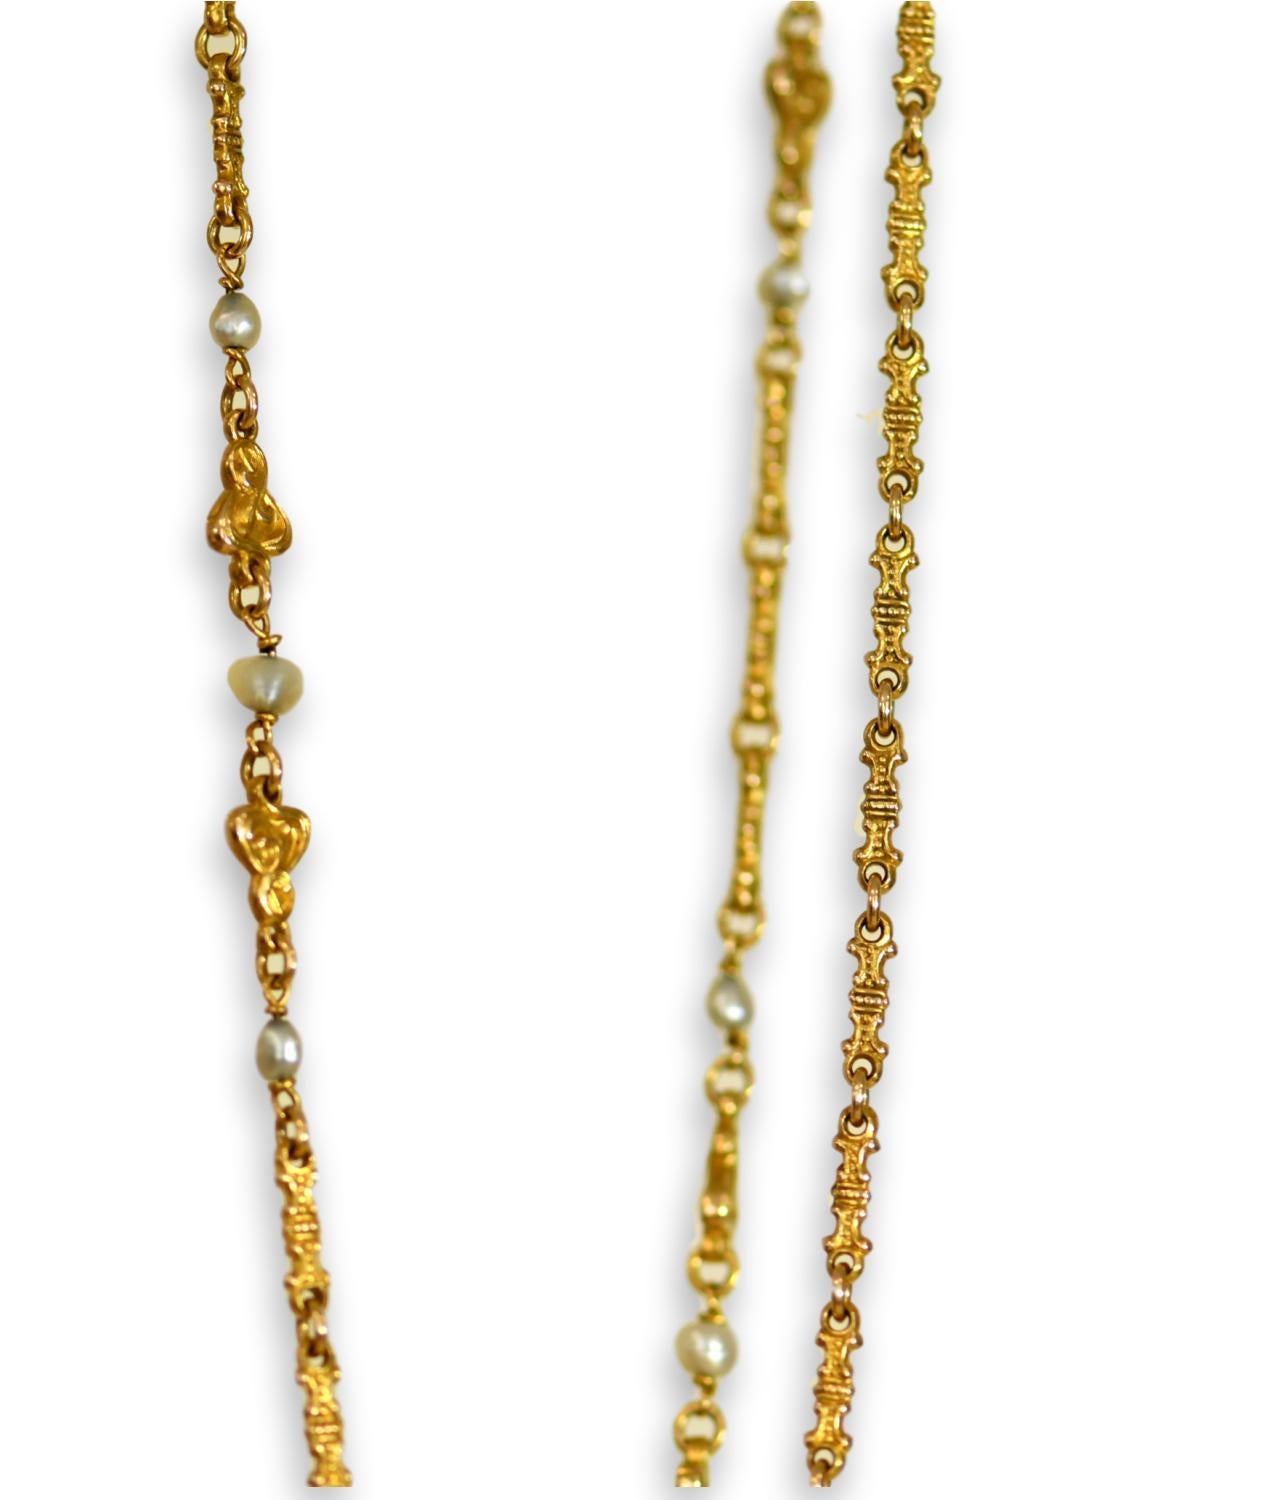 This beautiful long French chain is exceptional, both in design and quality. These chains were in high fashion and many were produced in France around the turn of the 19th and 20th century but you only see the special ones once in a while. 
You can